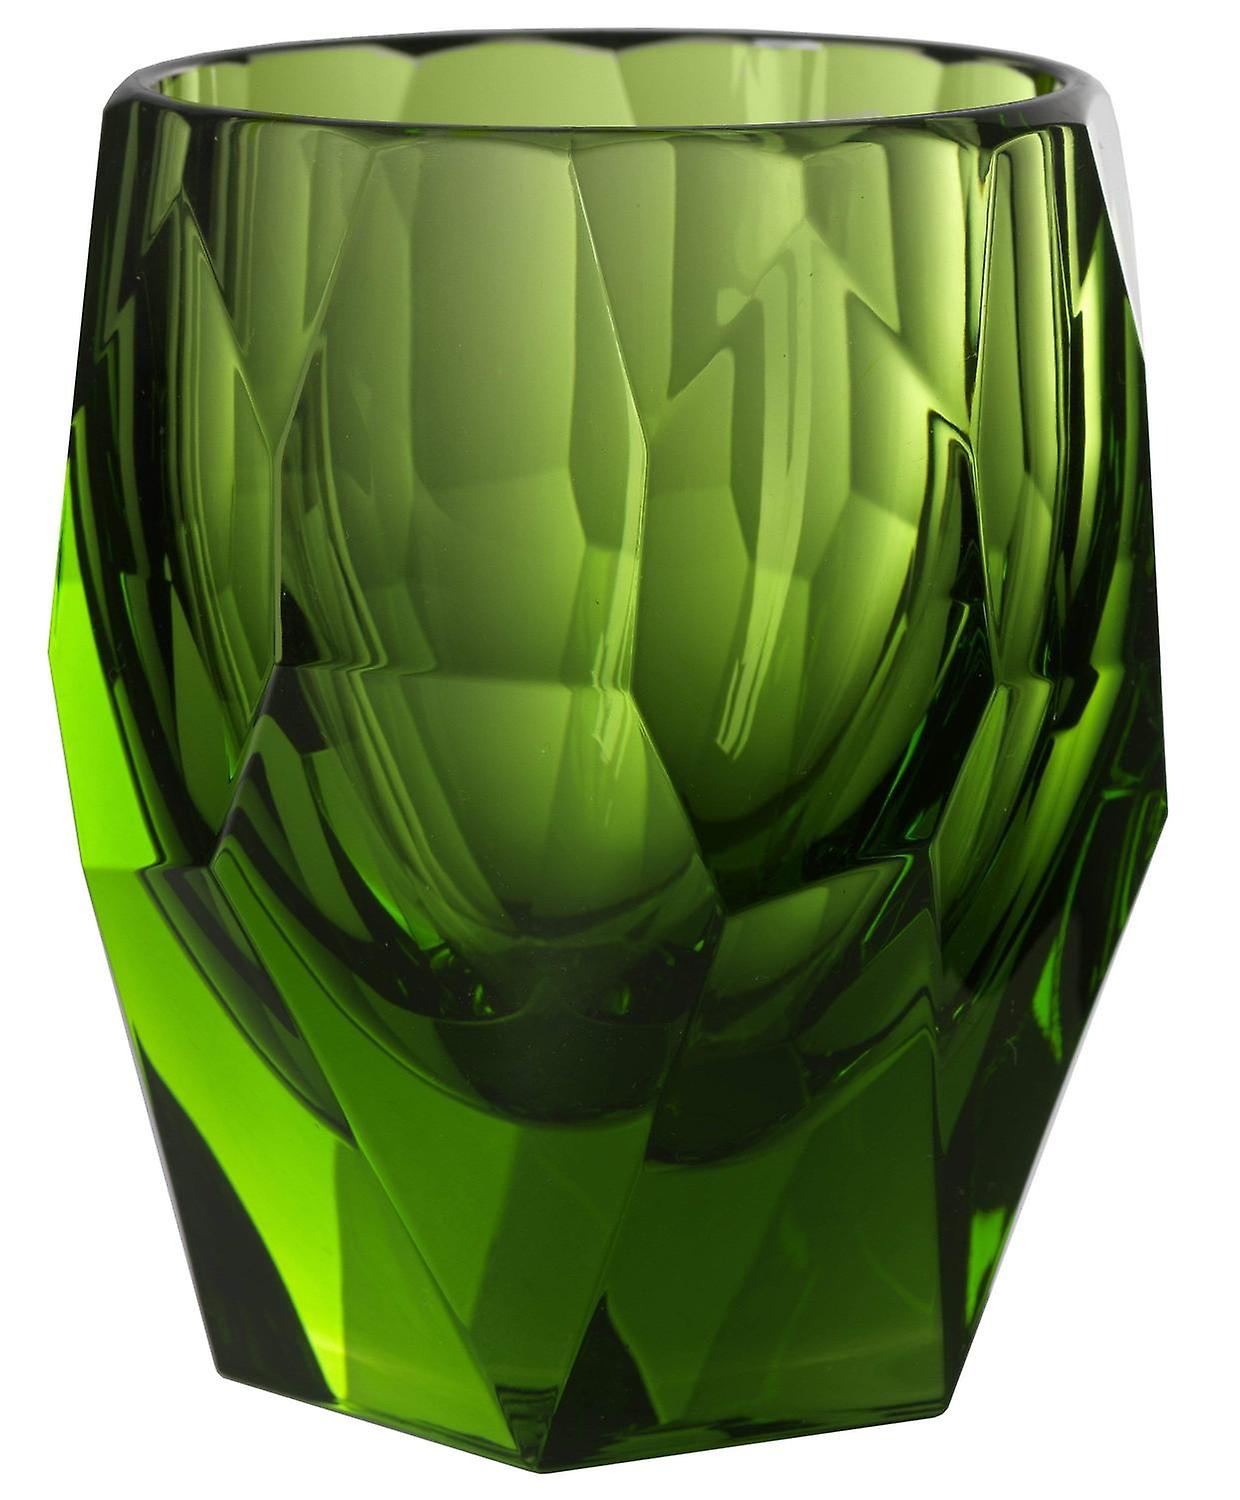 TUMBLER SUPER MILLY GREEN - WINE GLASS  - PACK OF SIX